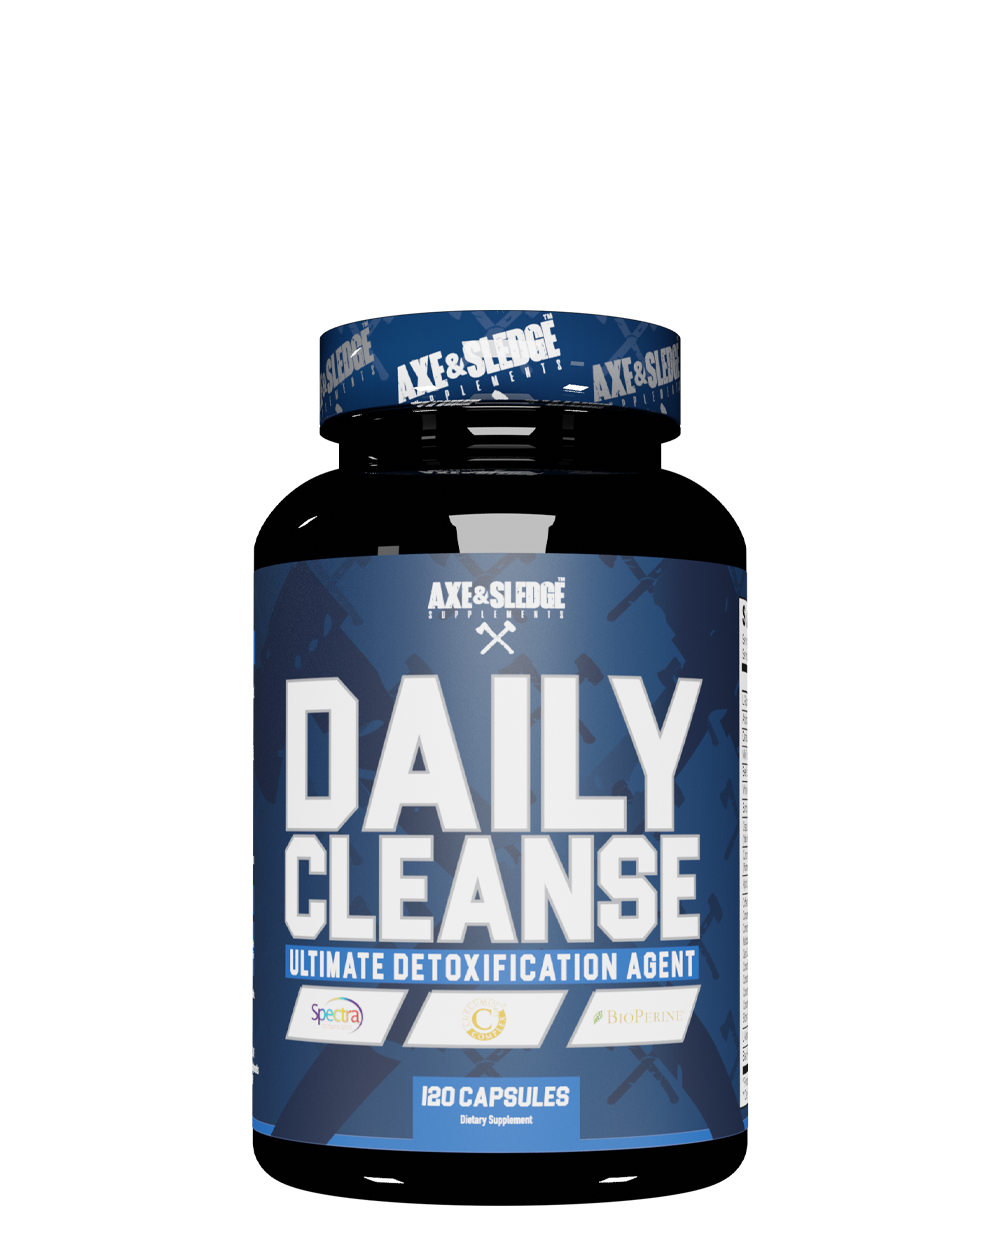 Daily Cleanse // Detoxification Agent